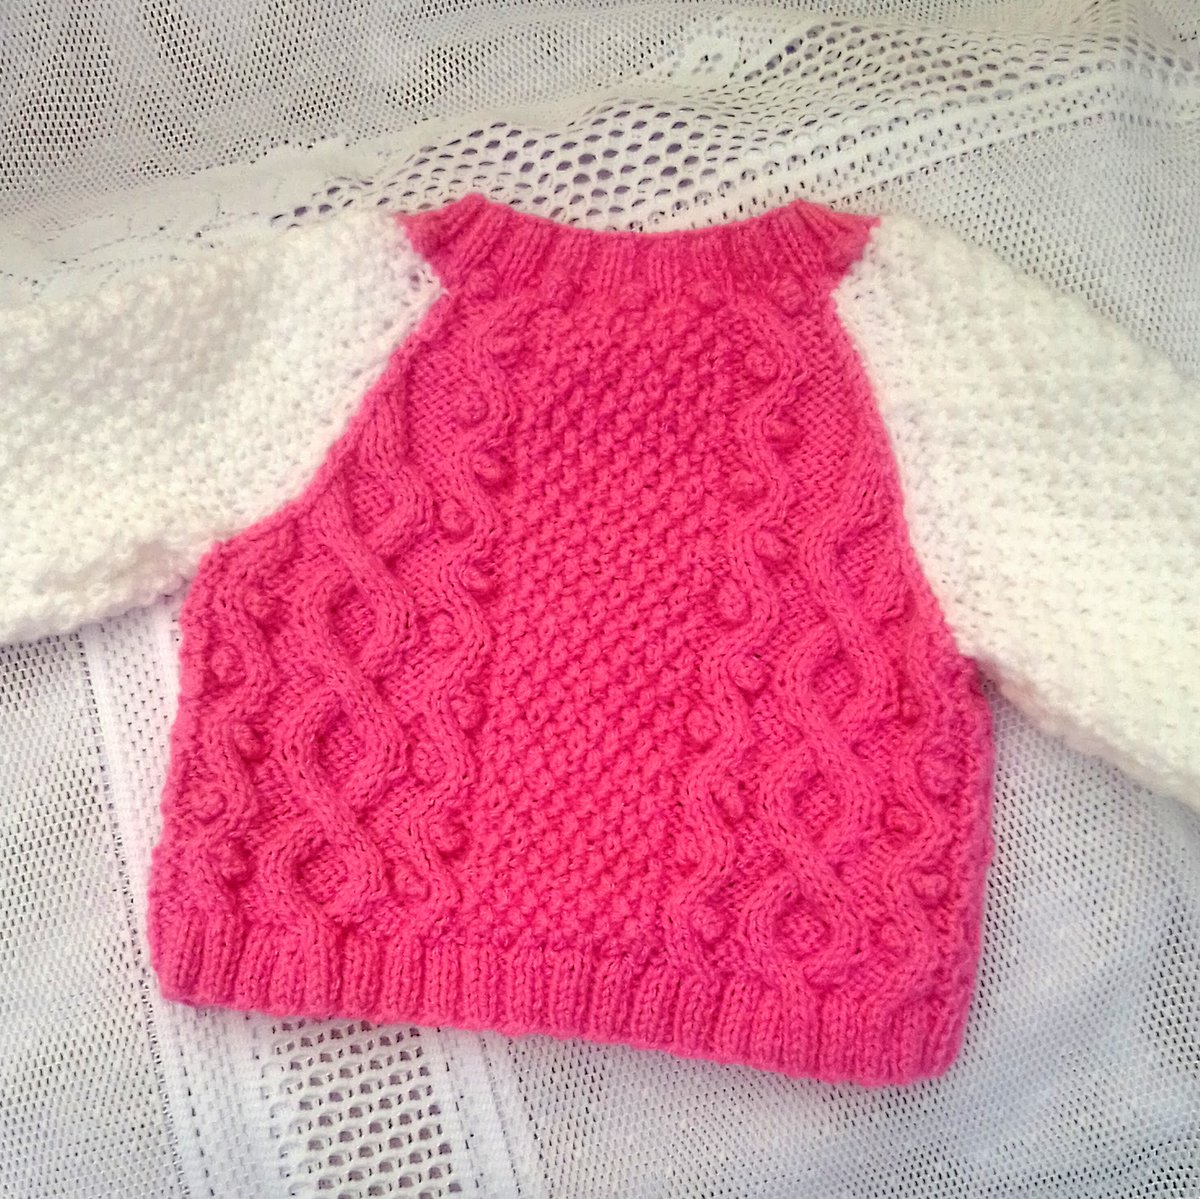 This pretty Cabled Cardigan for a Girl up to 11 years can be custom made for you, just let me know the size & colour required. Would make an ideal for a little girl. Price from £22.50 for a 22/24' chest. folksy.com/items/7969409-… #newonfolksy #creationsfortinytots #girlscardigan